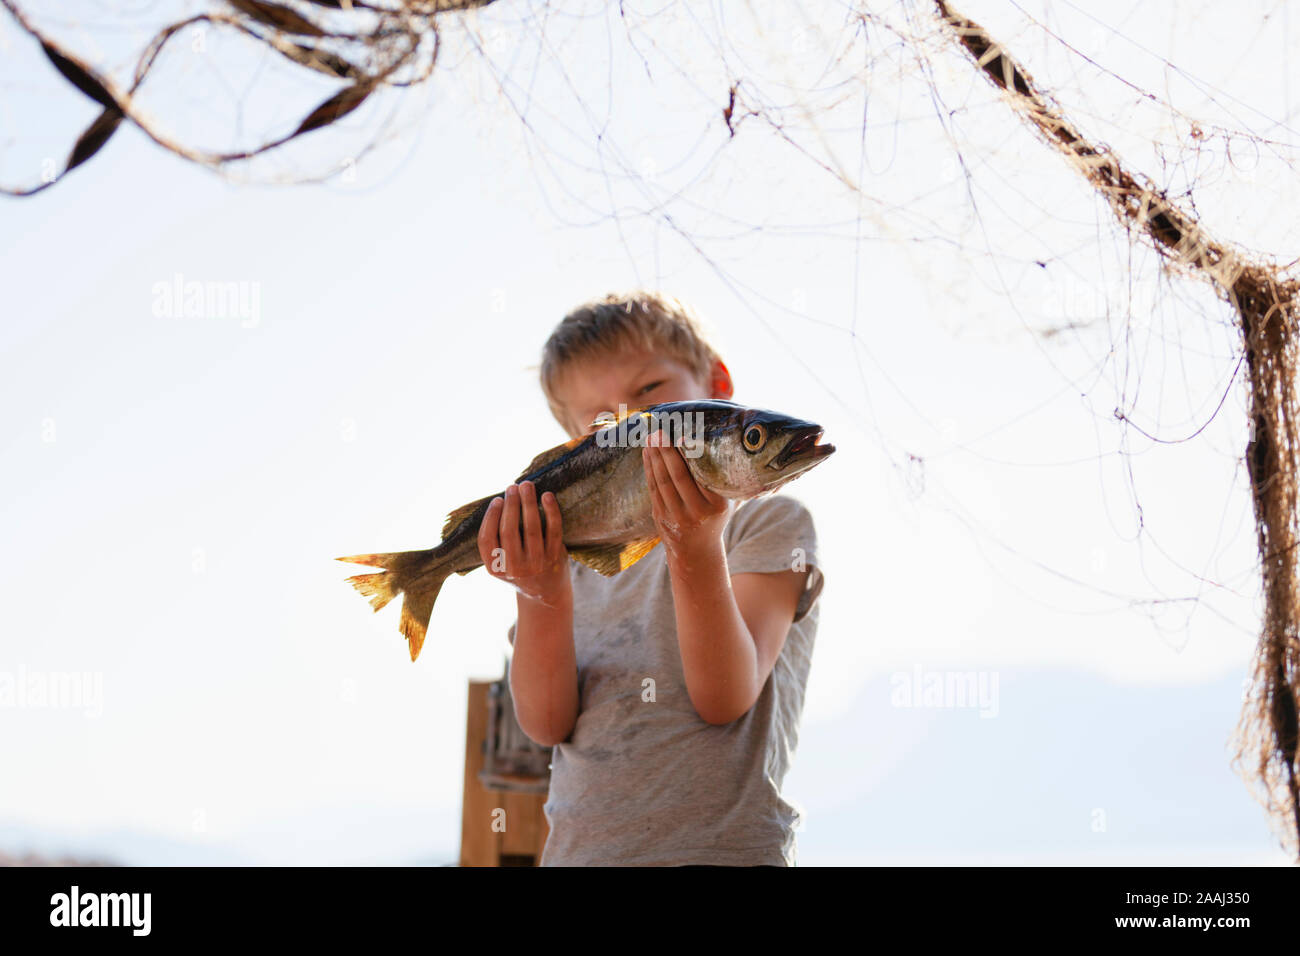 Boy holding up fish, fishing net in foreground Stock Photo